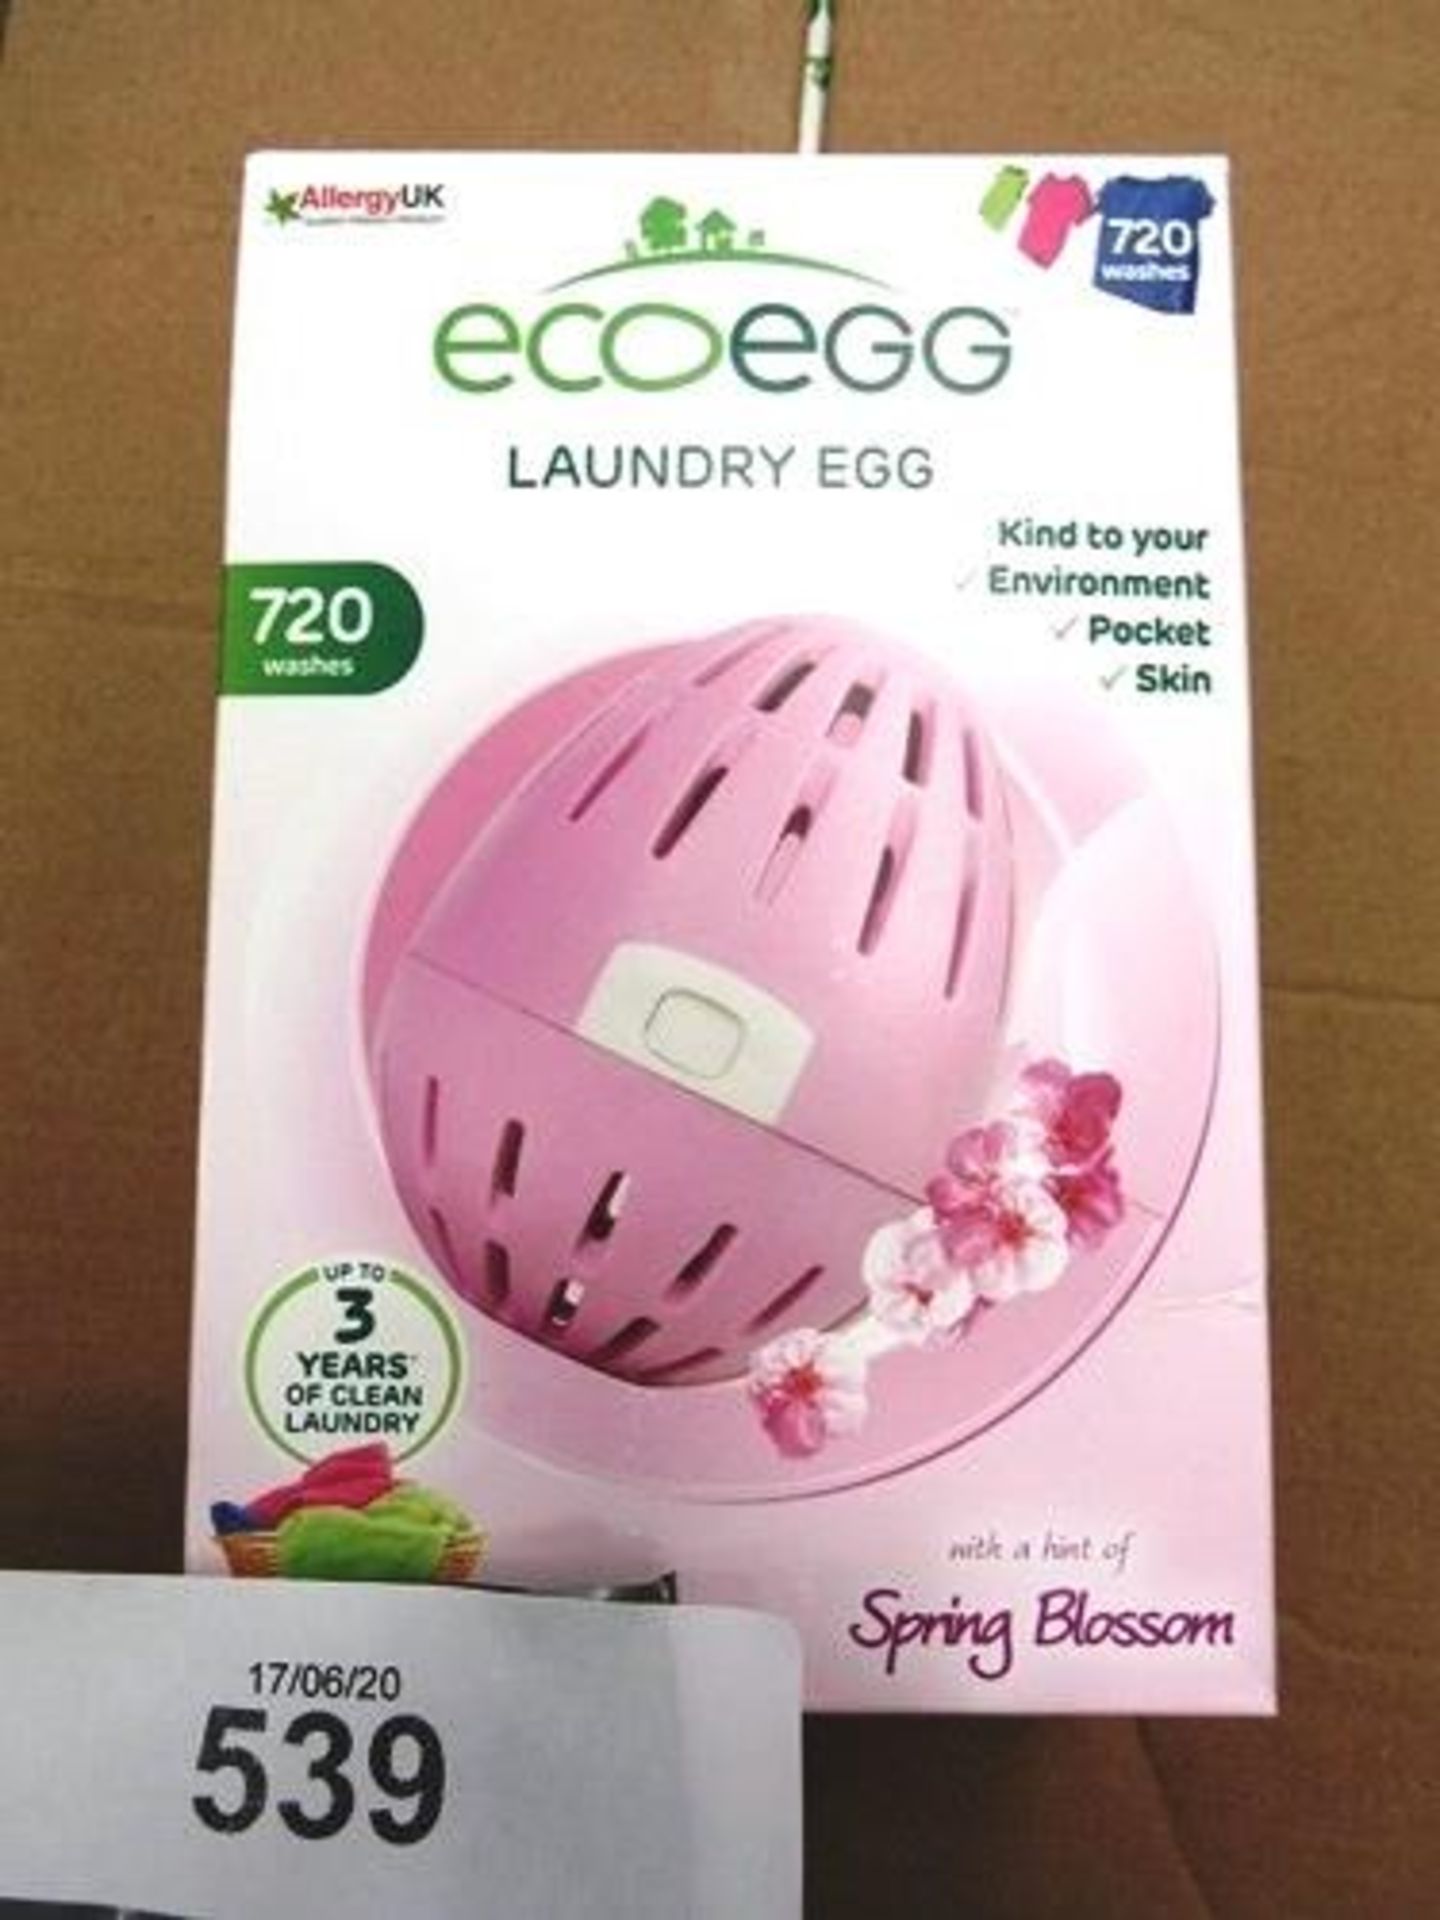 32 x Eco Egg laundry eggs, 720 washes, RRP £23.99 each - New in box (GS13)